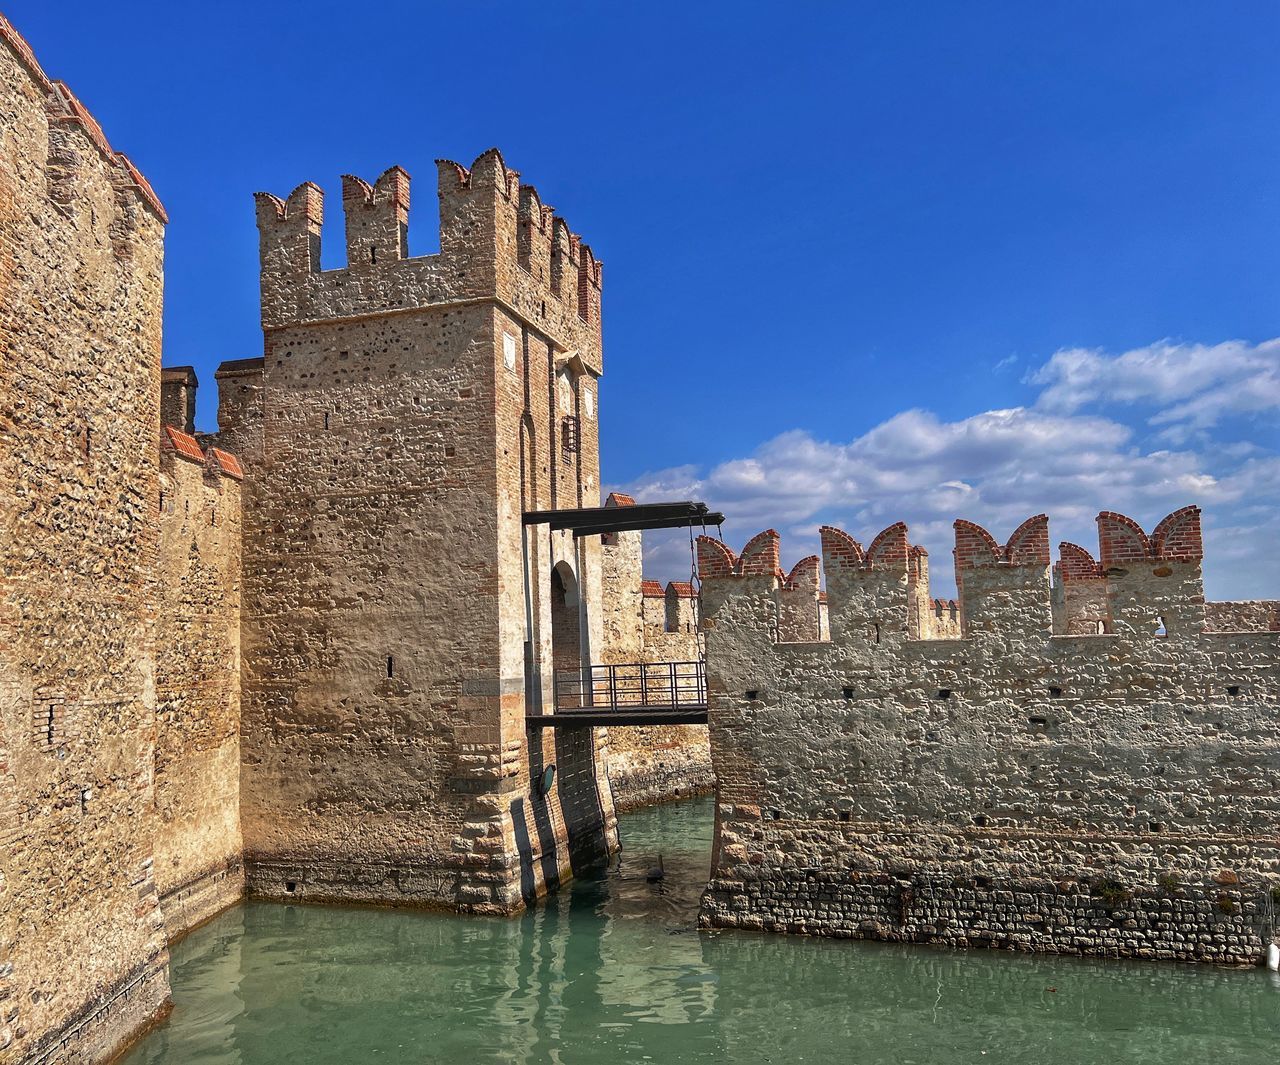 architecture, castle, built structure, water, building exterior, history, moat, sky, the past, fortification, travel destinations, château, fort, building, nature, tourism, water castle, travel, landmark, vacation, blue, wall, ancient history, medieval, fortified wall, town, no people, old, ancient, ruins, waterway, sea, tower, day, outdoors, city, historic site, wall - building feature, clear sky, sunny